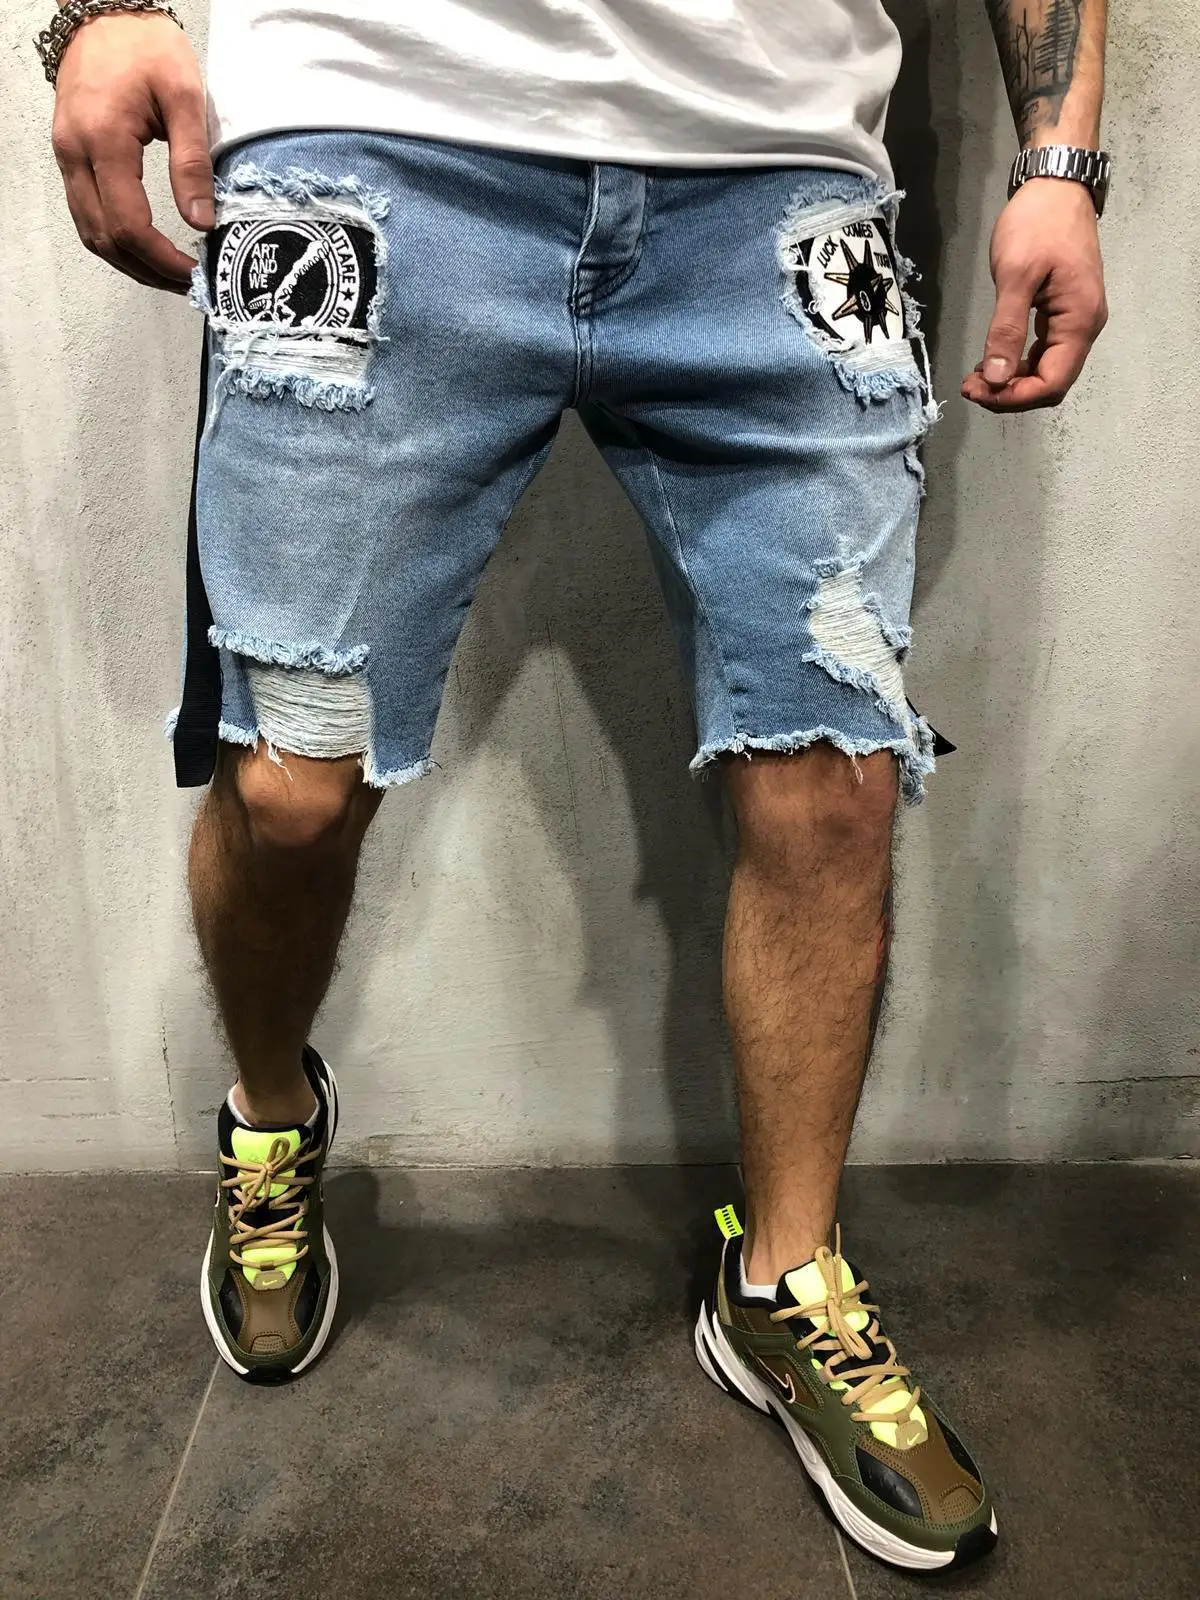 

Men's Jeans Knee Length Casual Ripped Hole Slim Fit Pants Torn Bottom Appliques Straight Denim Pants Zipper Fly Male Summer Pant